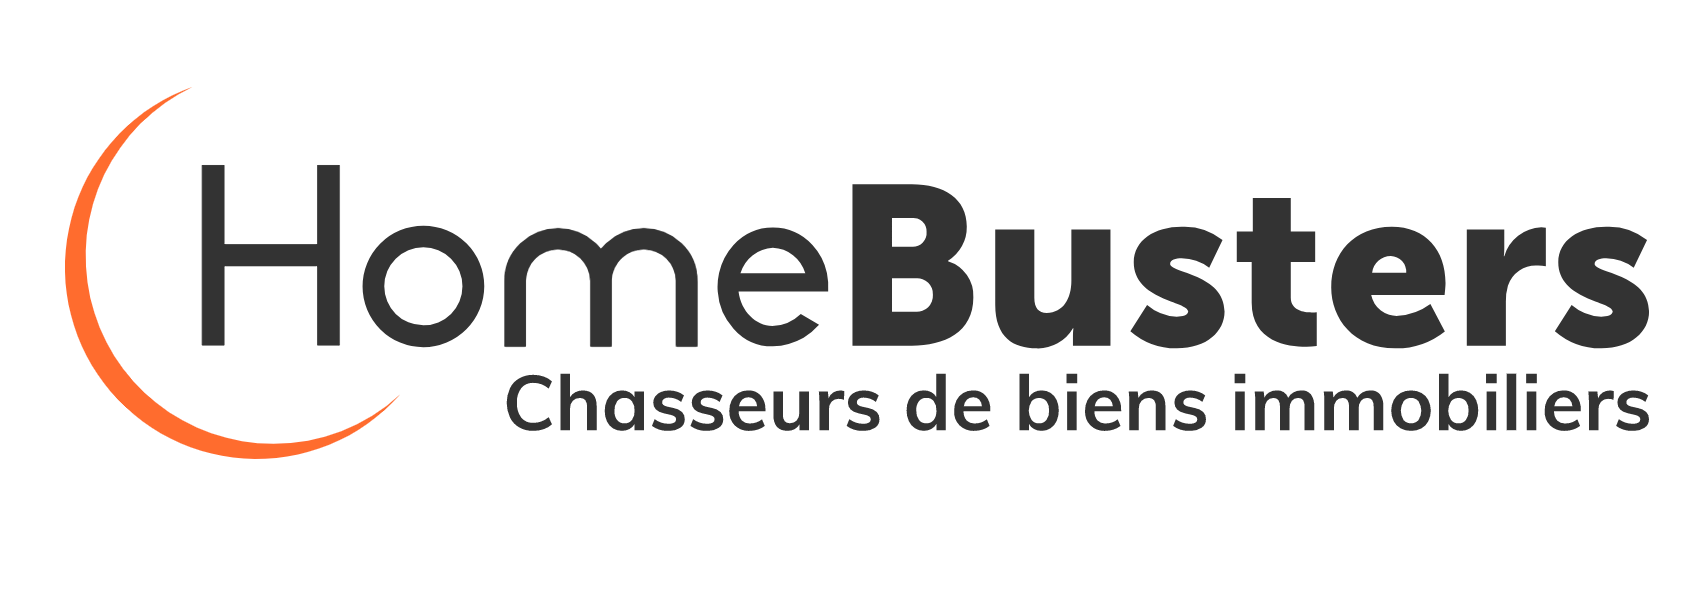 homebusters - chasseurs immobilier - logo